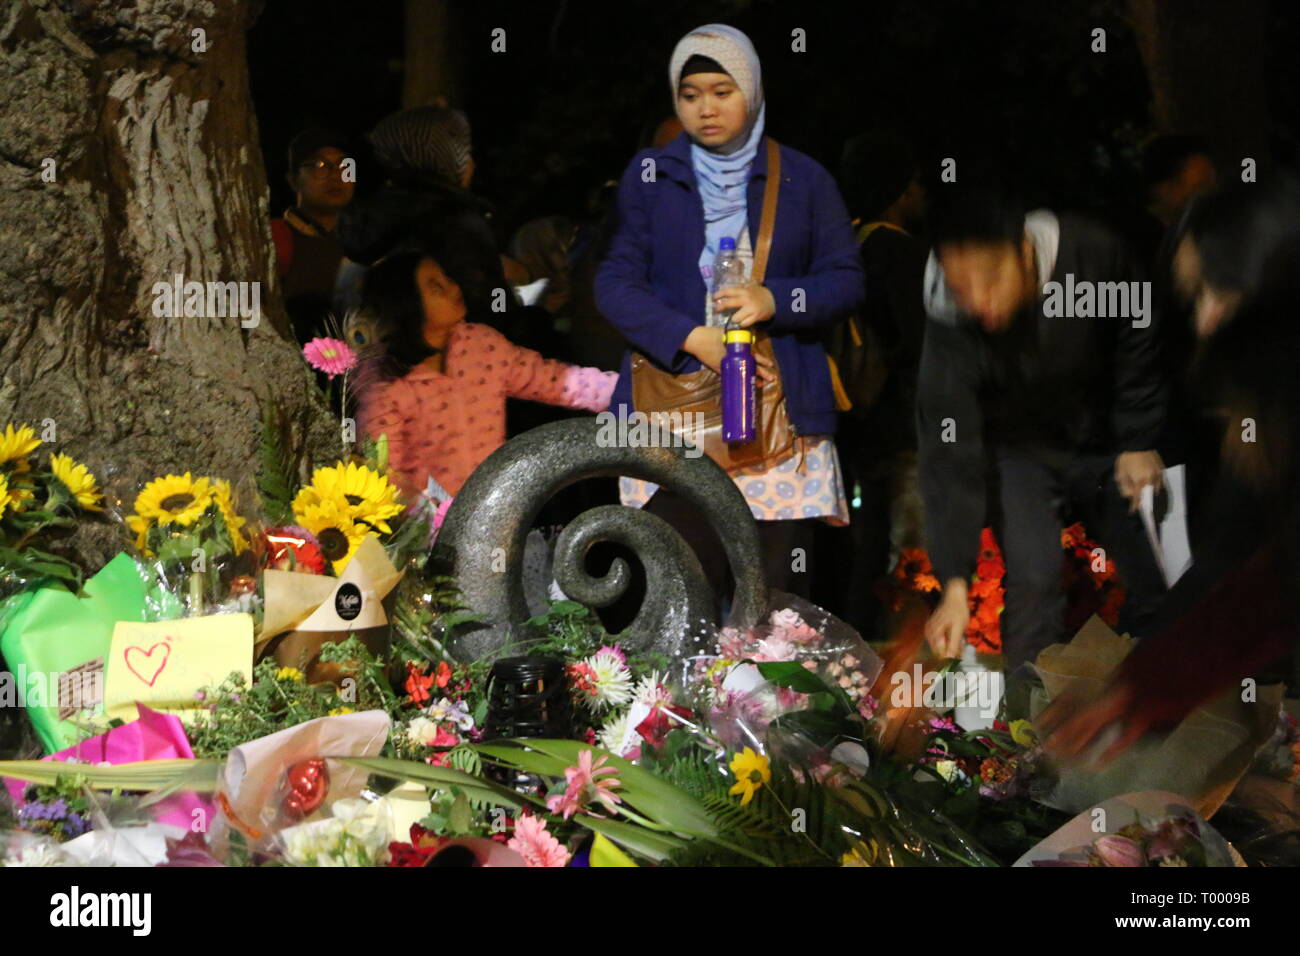 Indonesian community members seen paying respect to the victims of the Christchurch mosques shooting. Around 49 people has been reportedly killed in the Christchurch mosques terrorist attack shooting targeting the Masjid Al Noor Mosque and the Linwood Mosque. Stock Photo